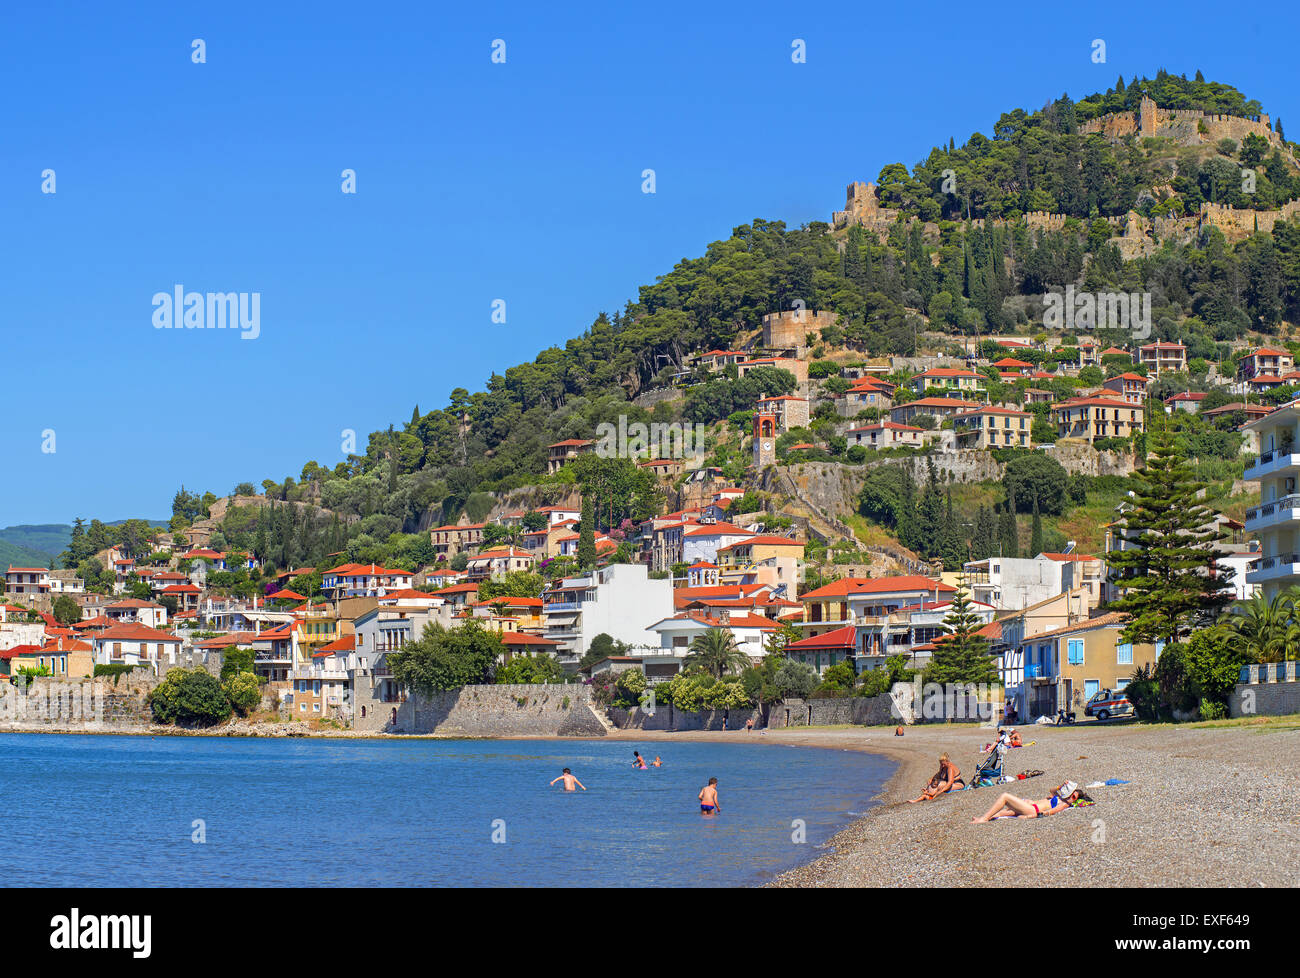 View to Nafpaktos old town, Gribovo beach and the castle in the Corinthian gulf, Aetoloacarnania region,  Sterea Ellada, Greece Stock Photo